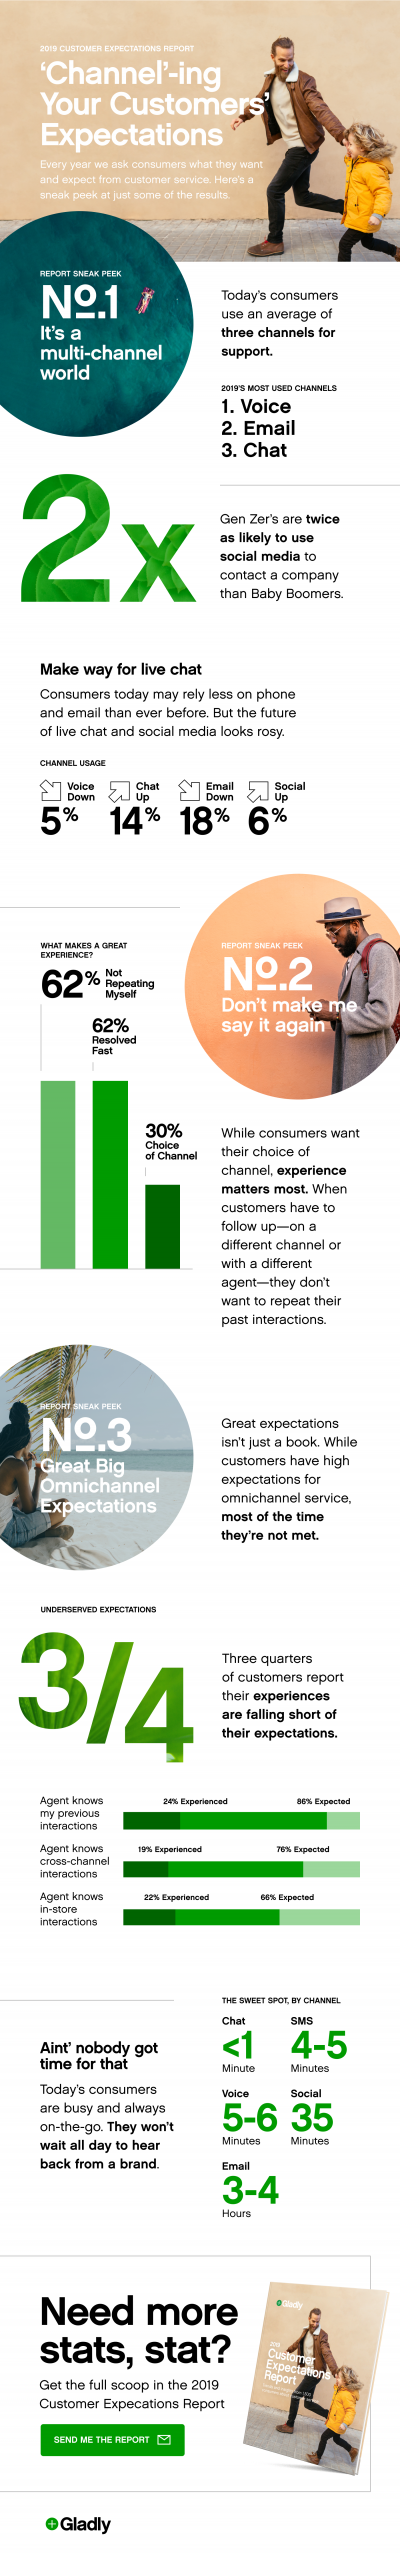 Customer Expectations Infographic